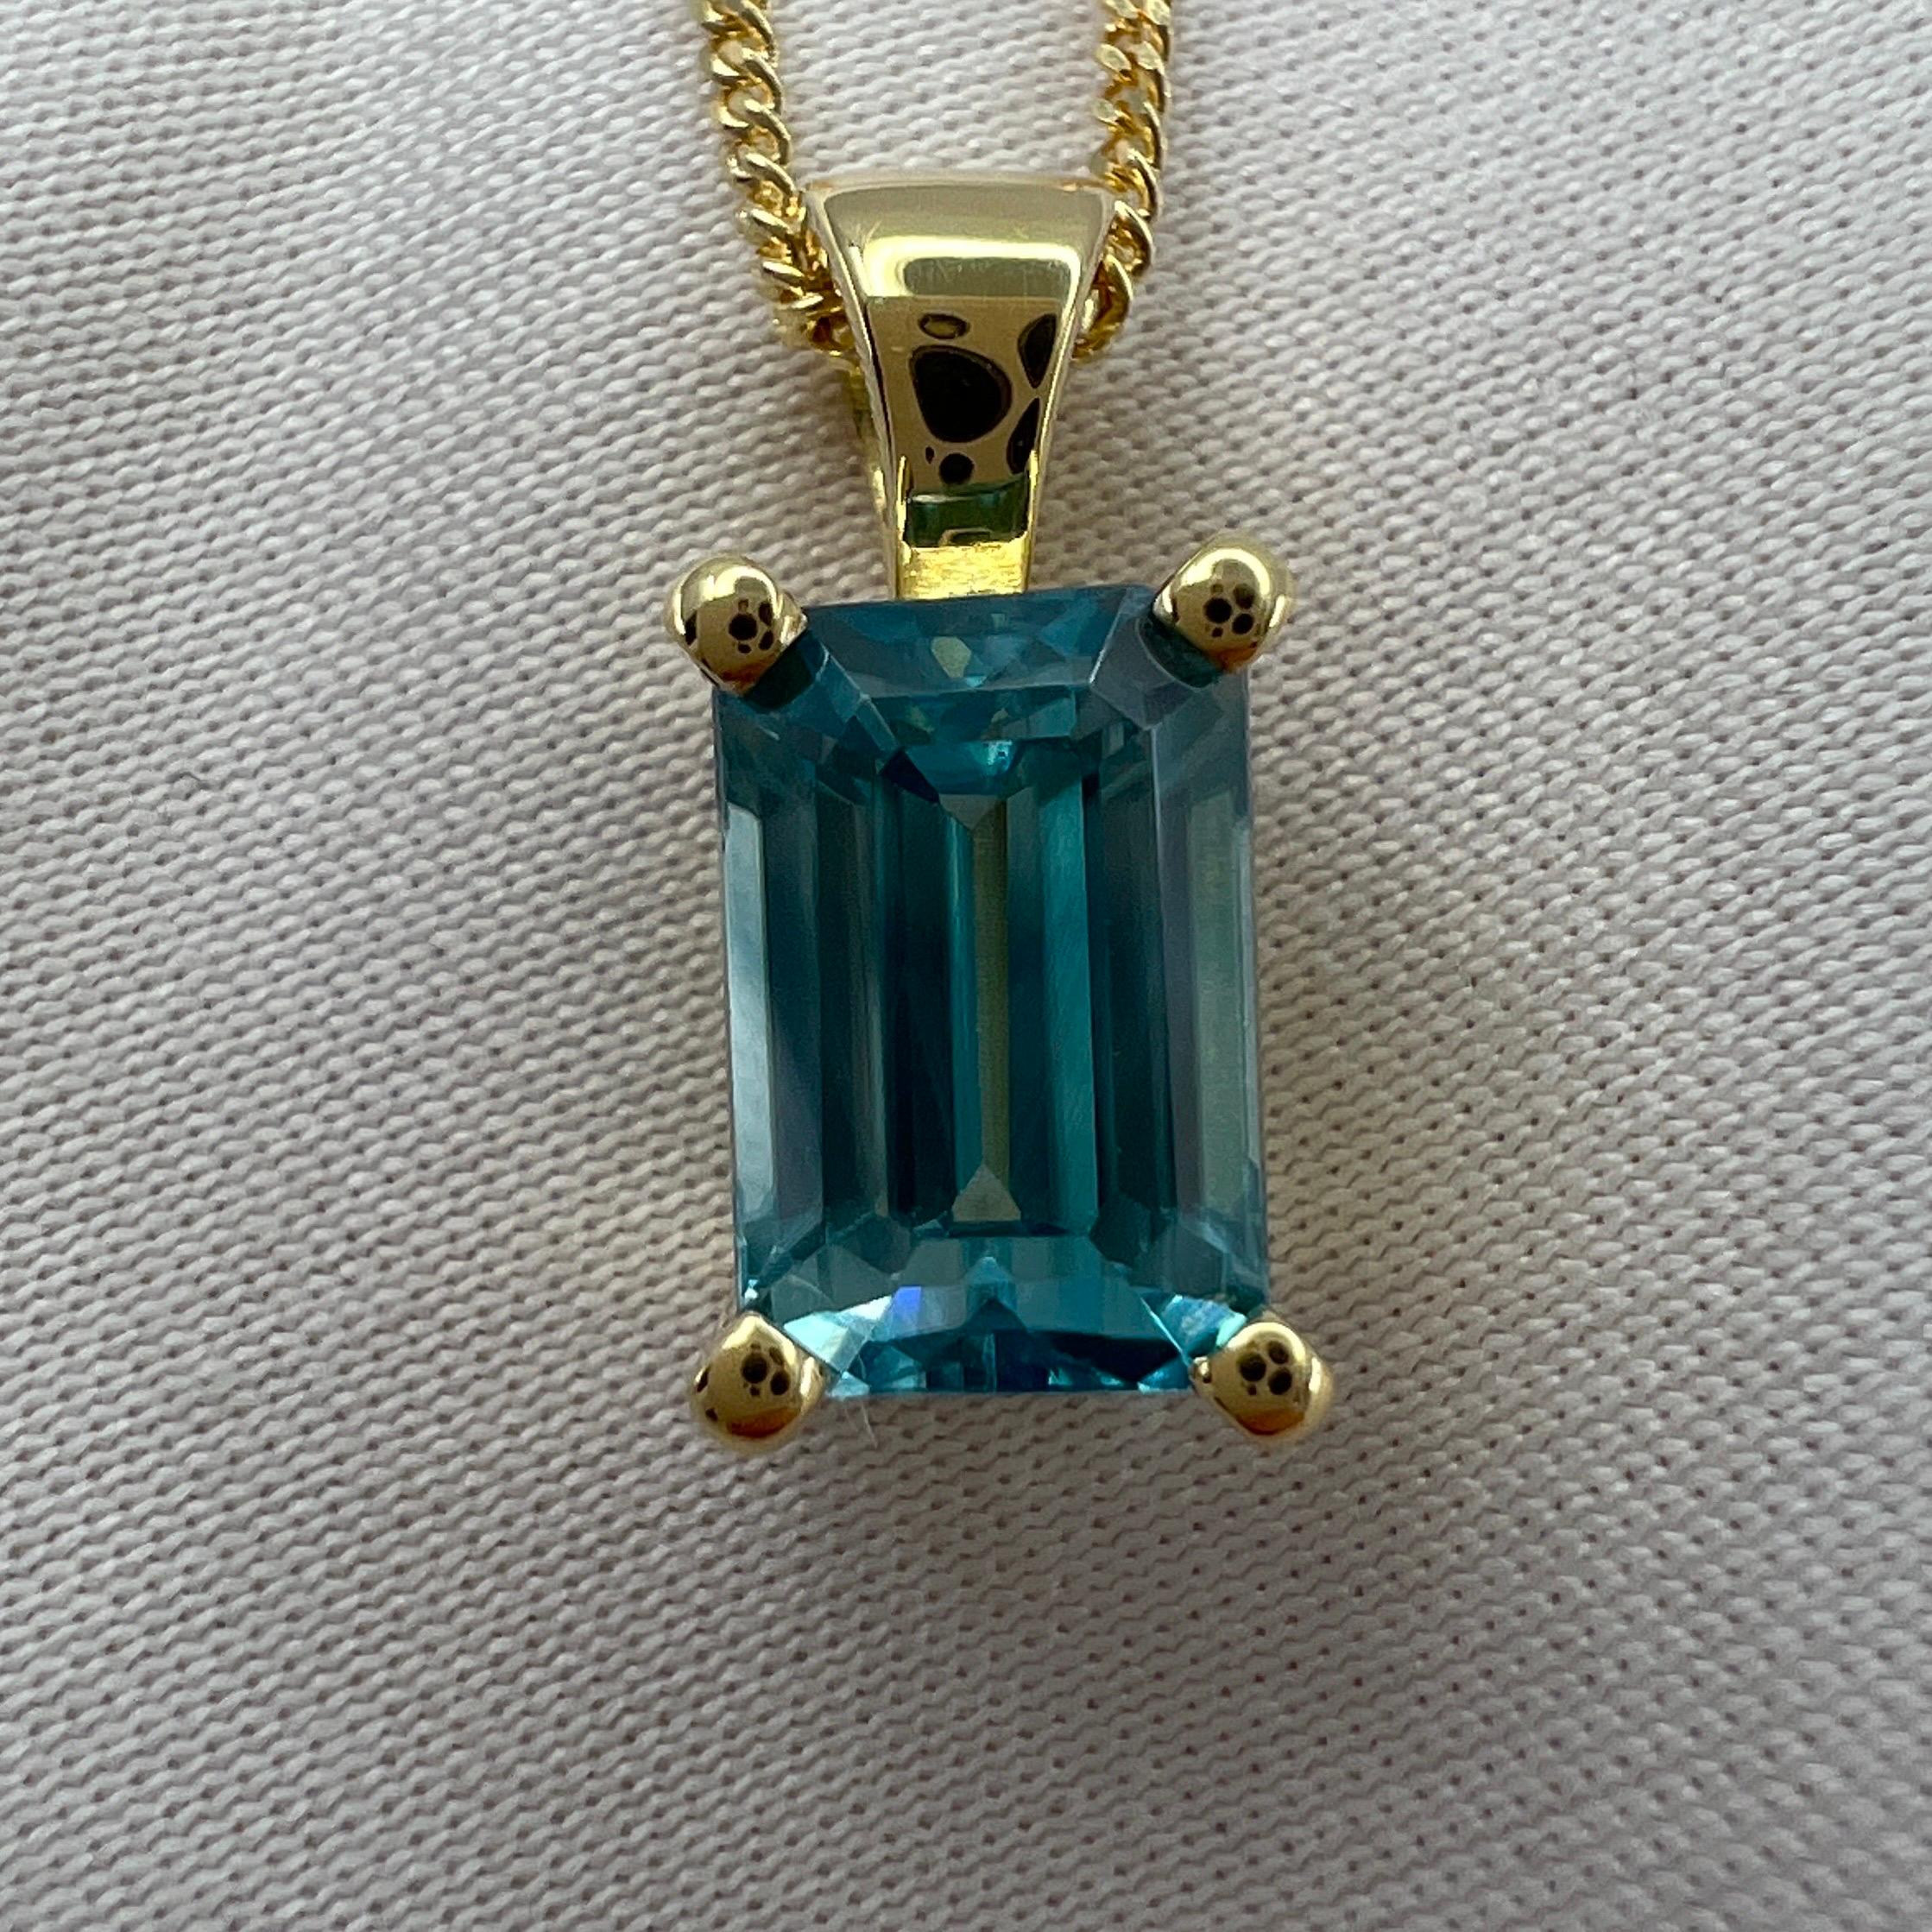 Vivid Neon Blue Natural Zircon Emerald Cut 18k Yellow Gold Pendant Necklace.

Beautiful natural 2.45 carat blue zircon set in a fine 18k yellow gold solitaire pendant. Stunning blue zircon with a vivid neon blue colour and excellent clarity, very